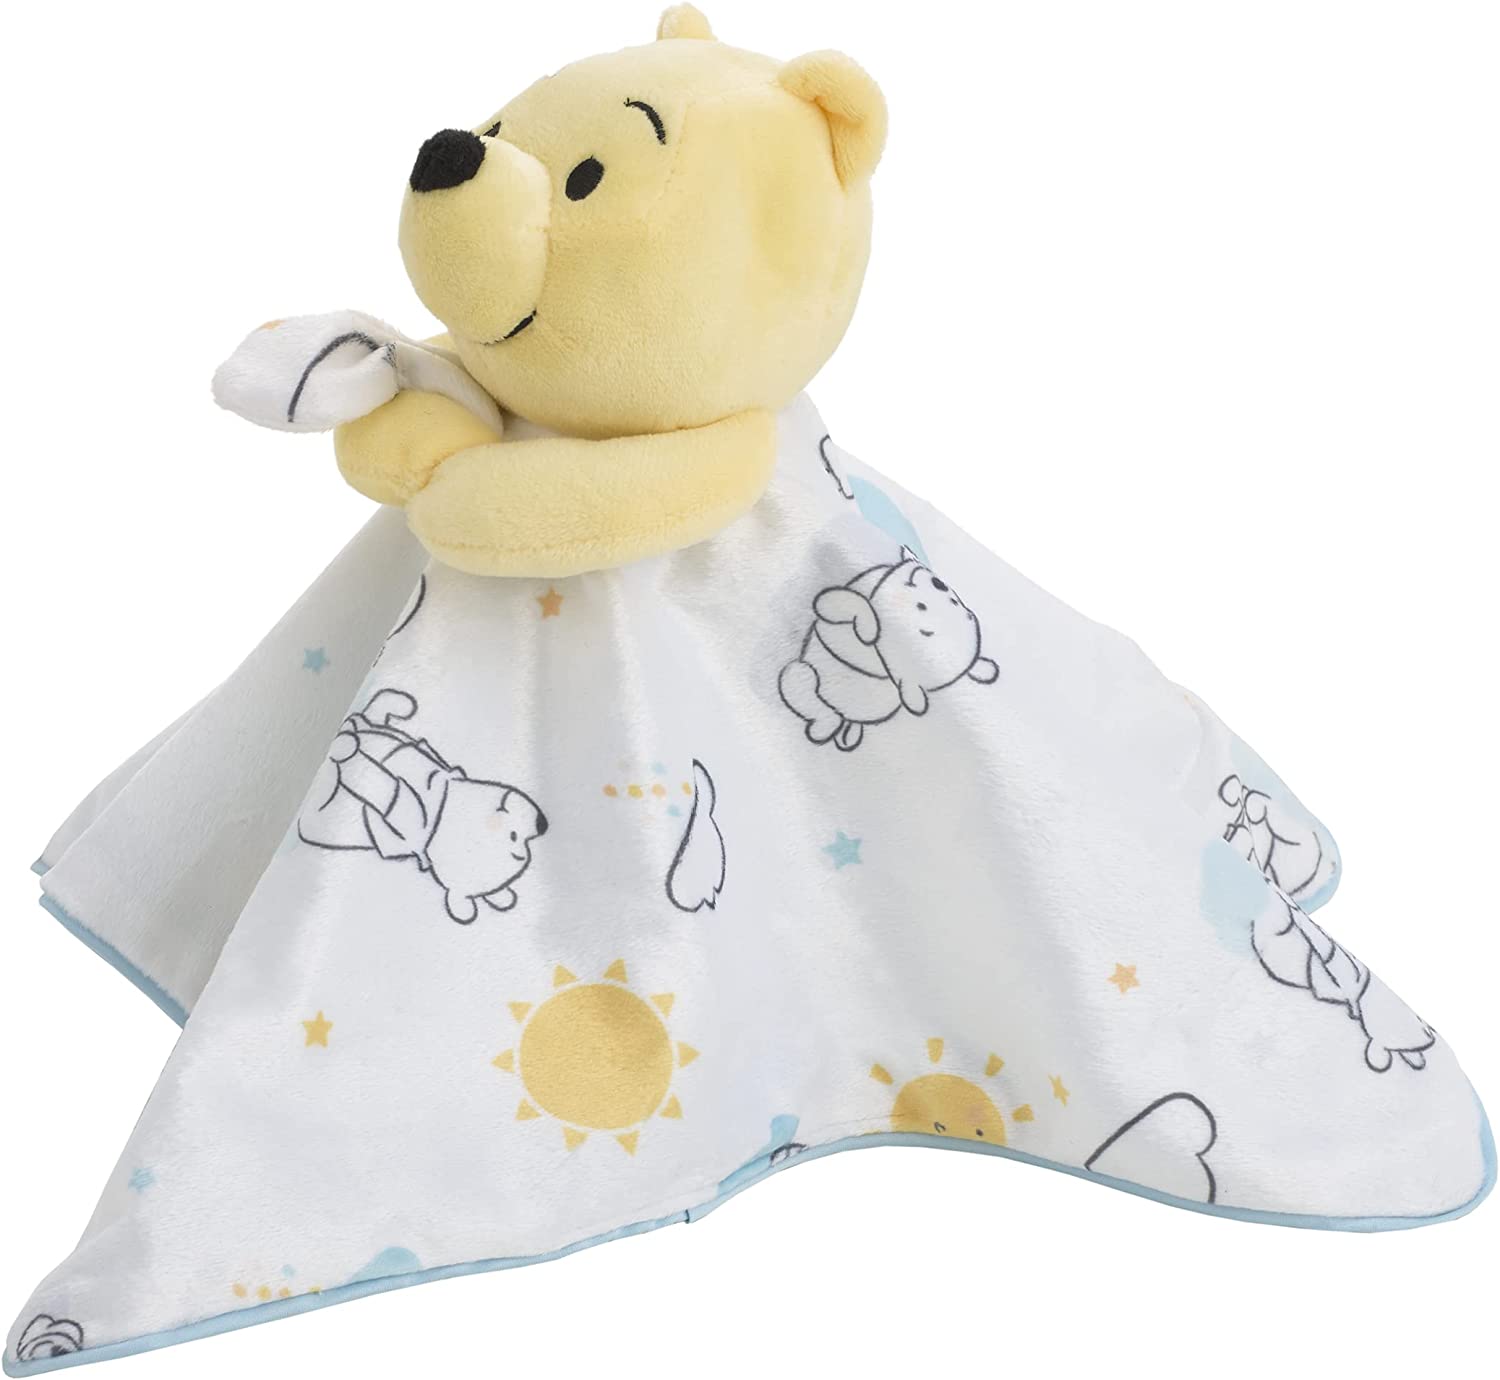 Disney Winnie The Pooh White, Yellow, and Aqua Cloud and Sun Lovey Security Blanket - image 2 of 5